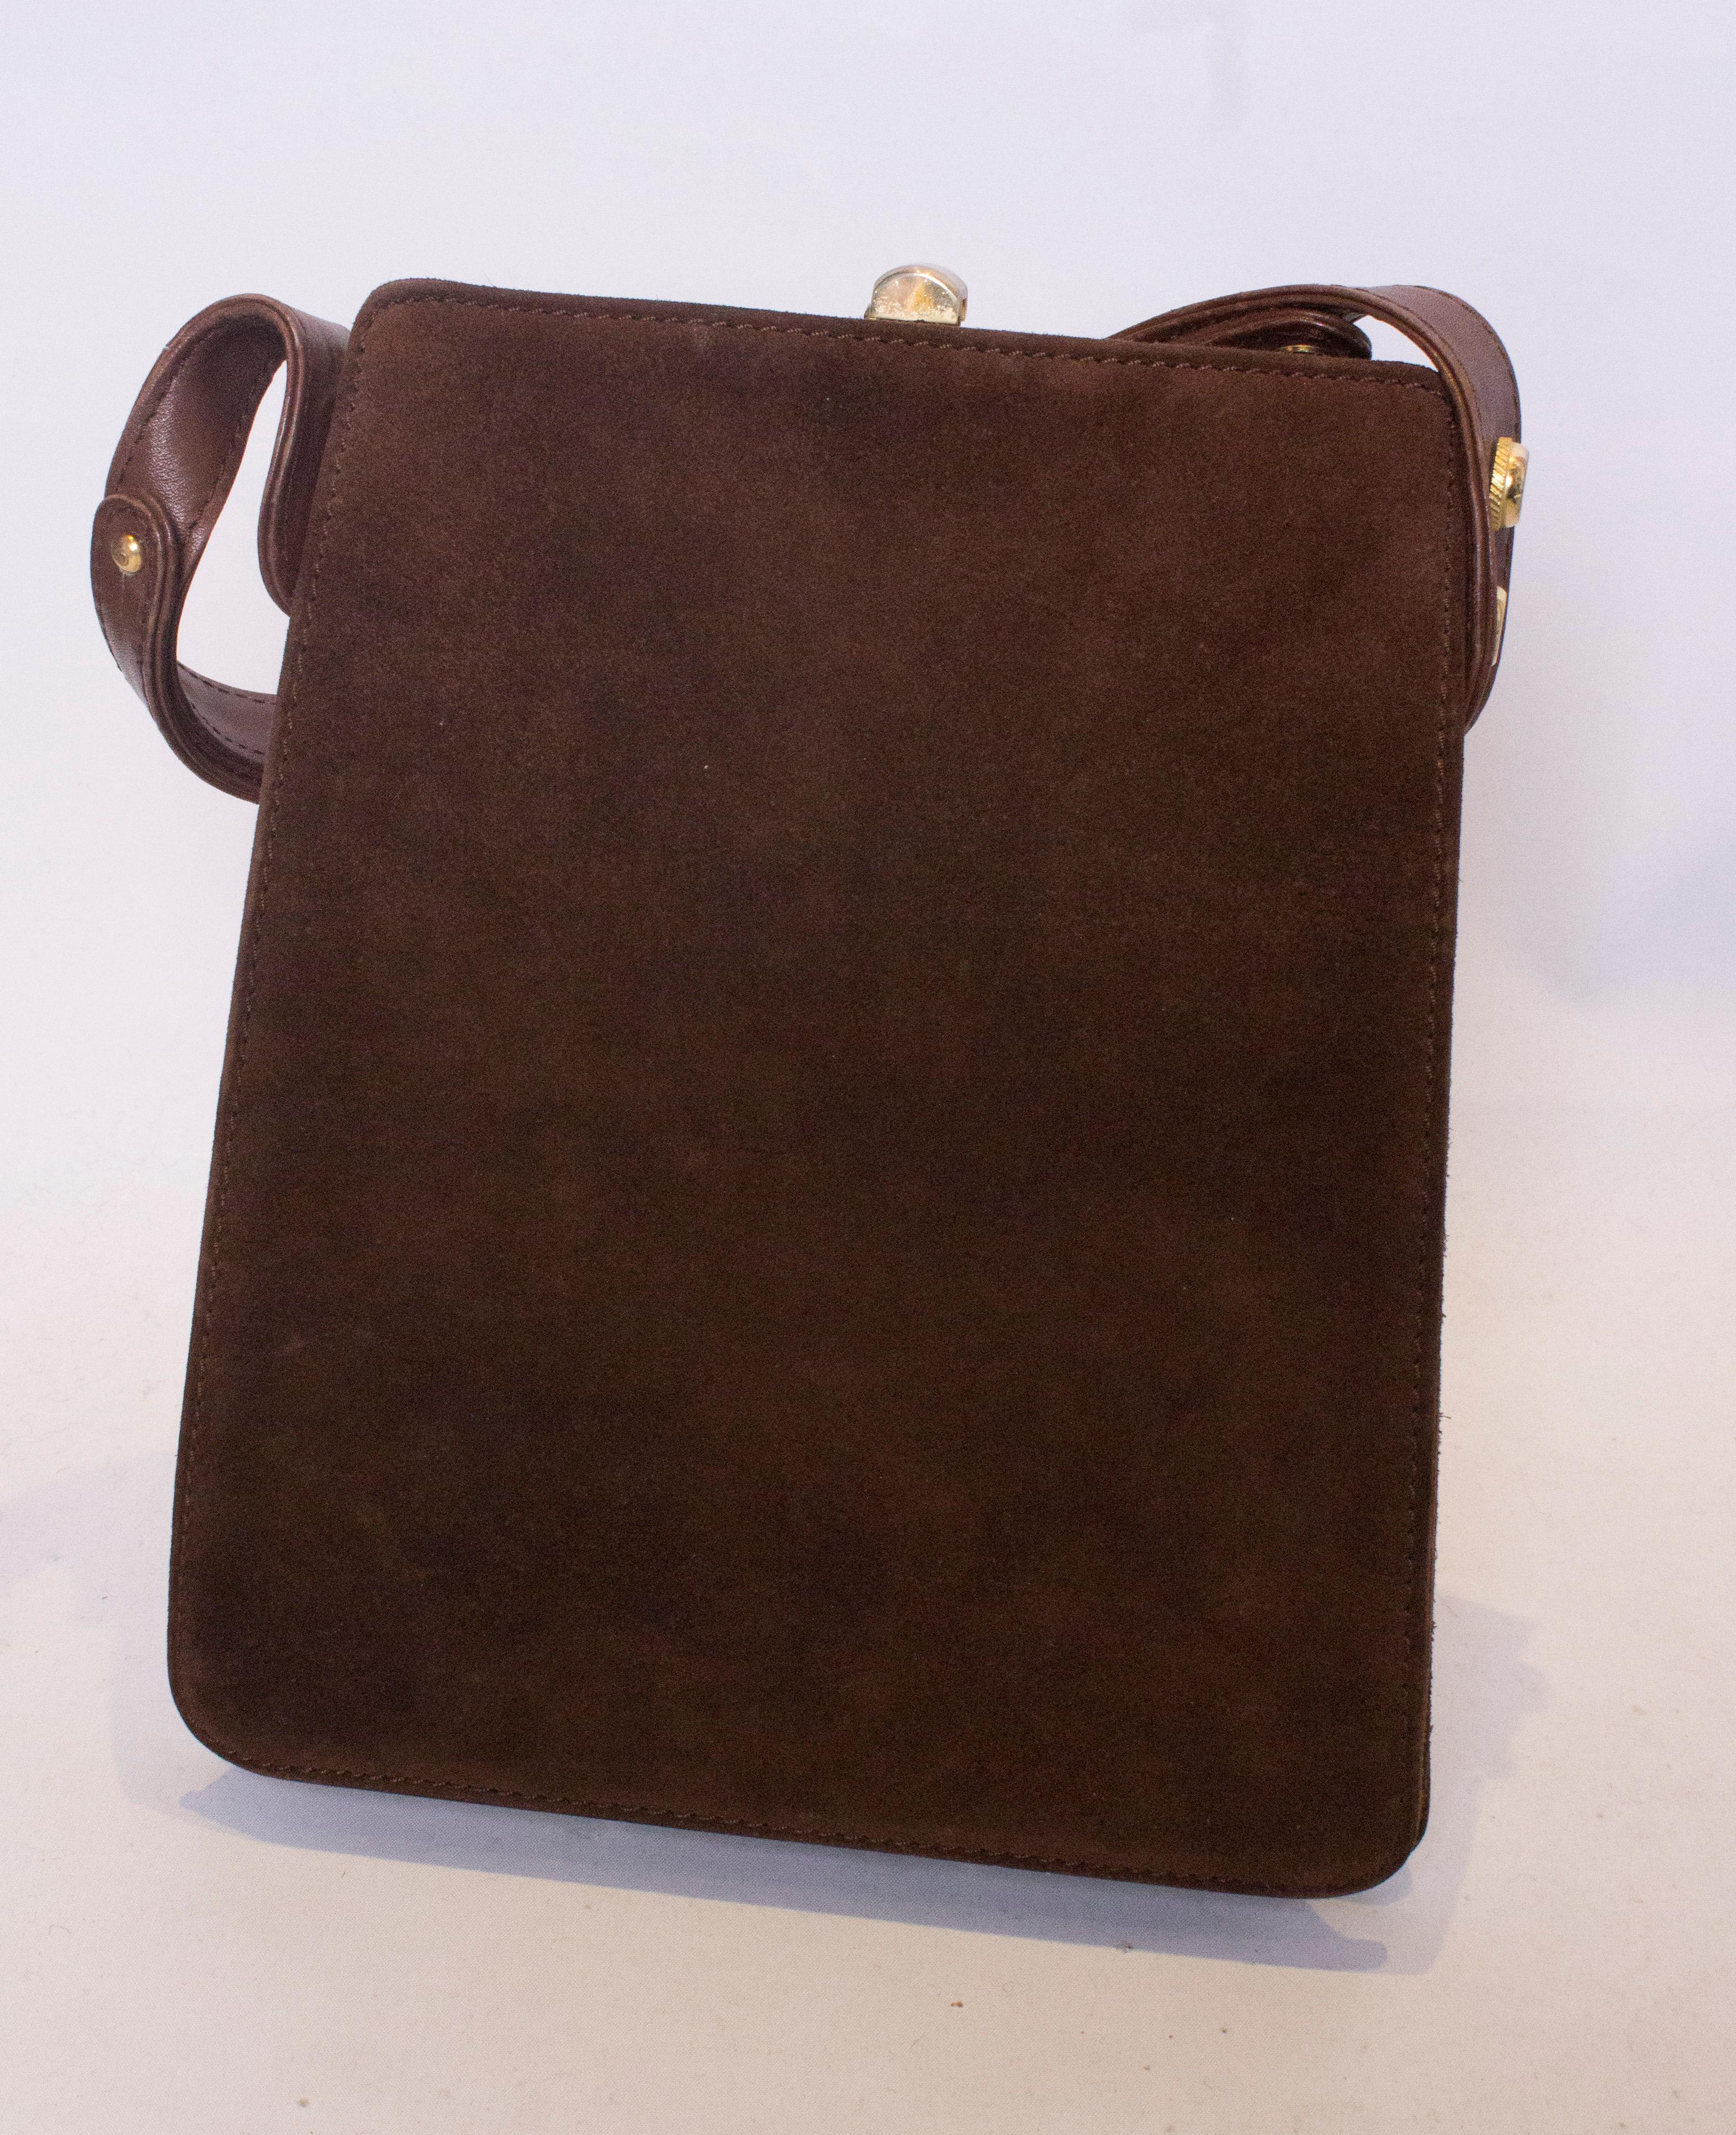 An elegant and interesting vintage handbag in brown leather and suede. The bag has an adjustable strap,and can be worn as a shoulder bag or hand bag.  The bag has a central top clasp, and internally there are two pouch pockets and a matching purse.